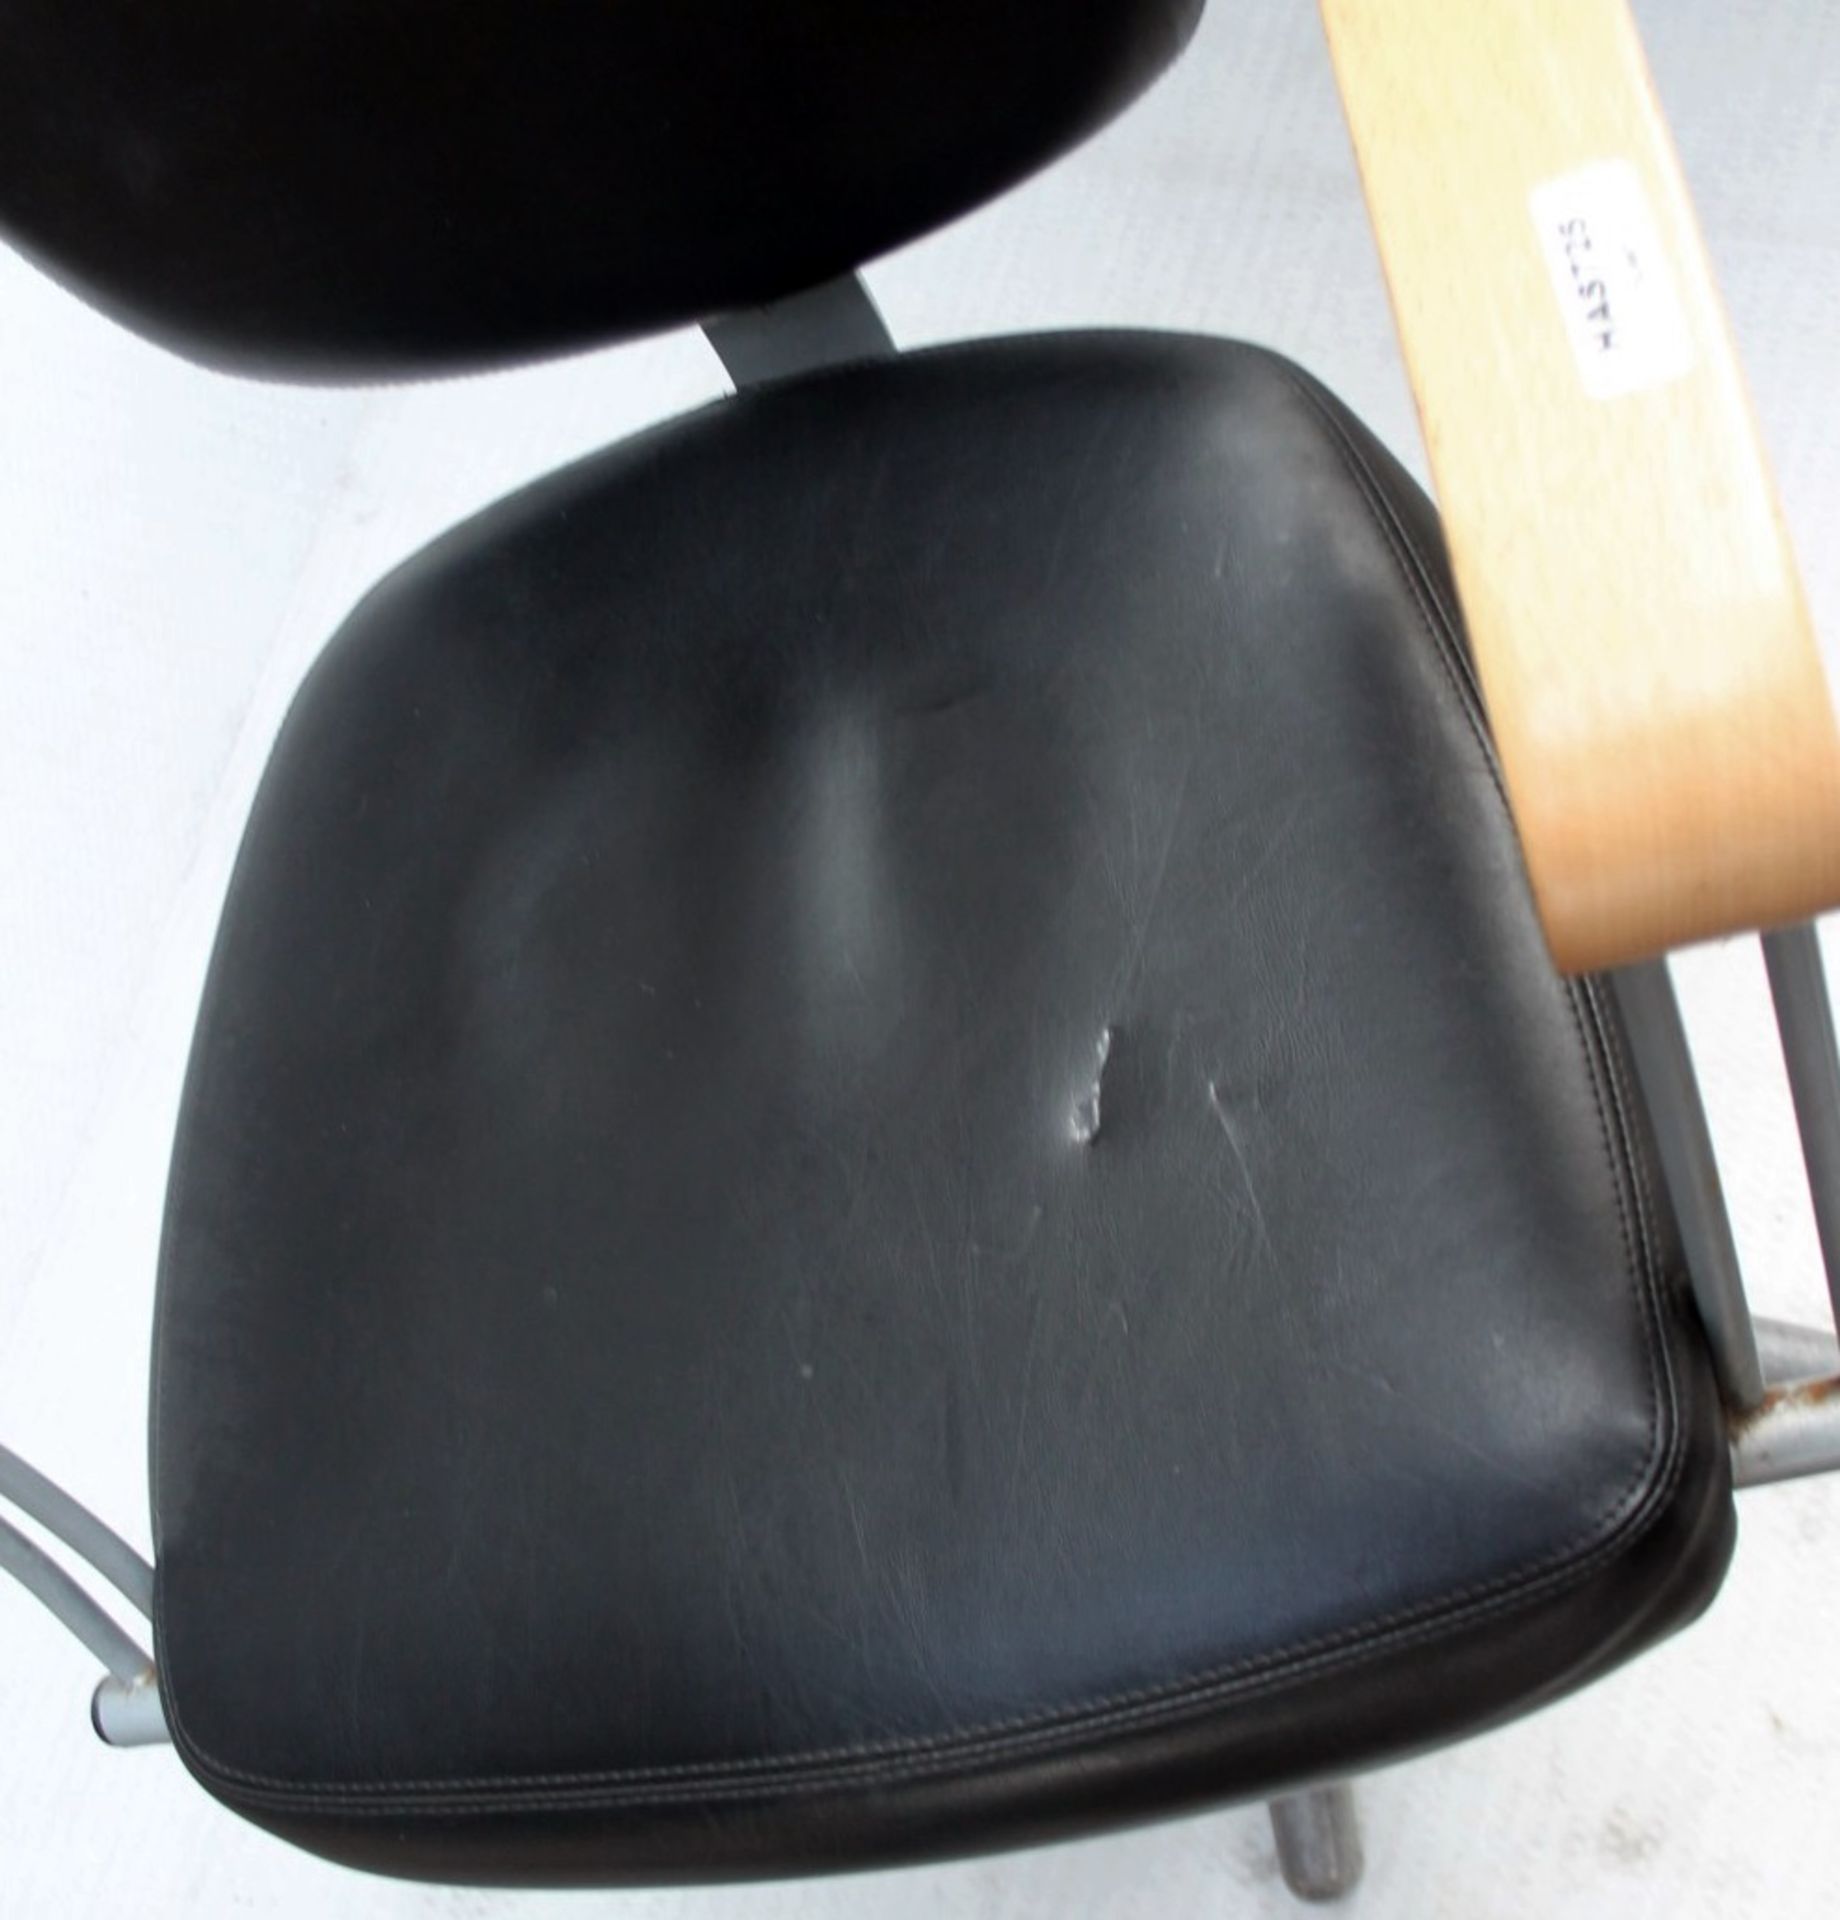 1 x Adjustable Black Hydraulic Barber Hairdressing Chair - Recently Removed From A Boutique Hair - Image 10 of 11